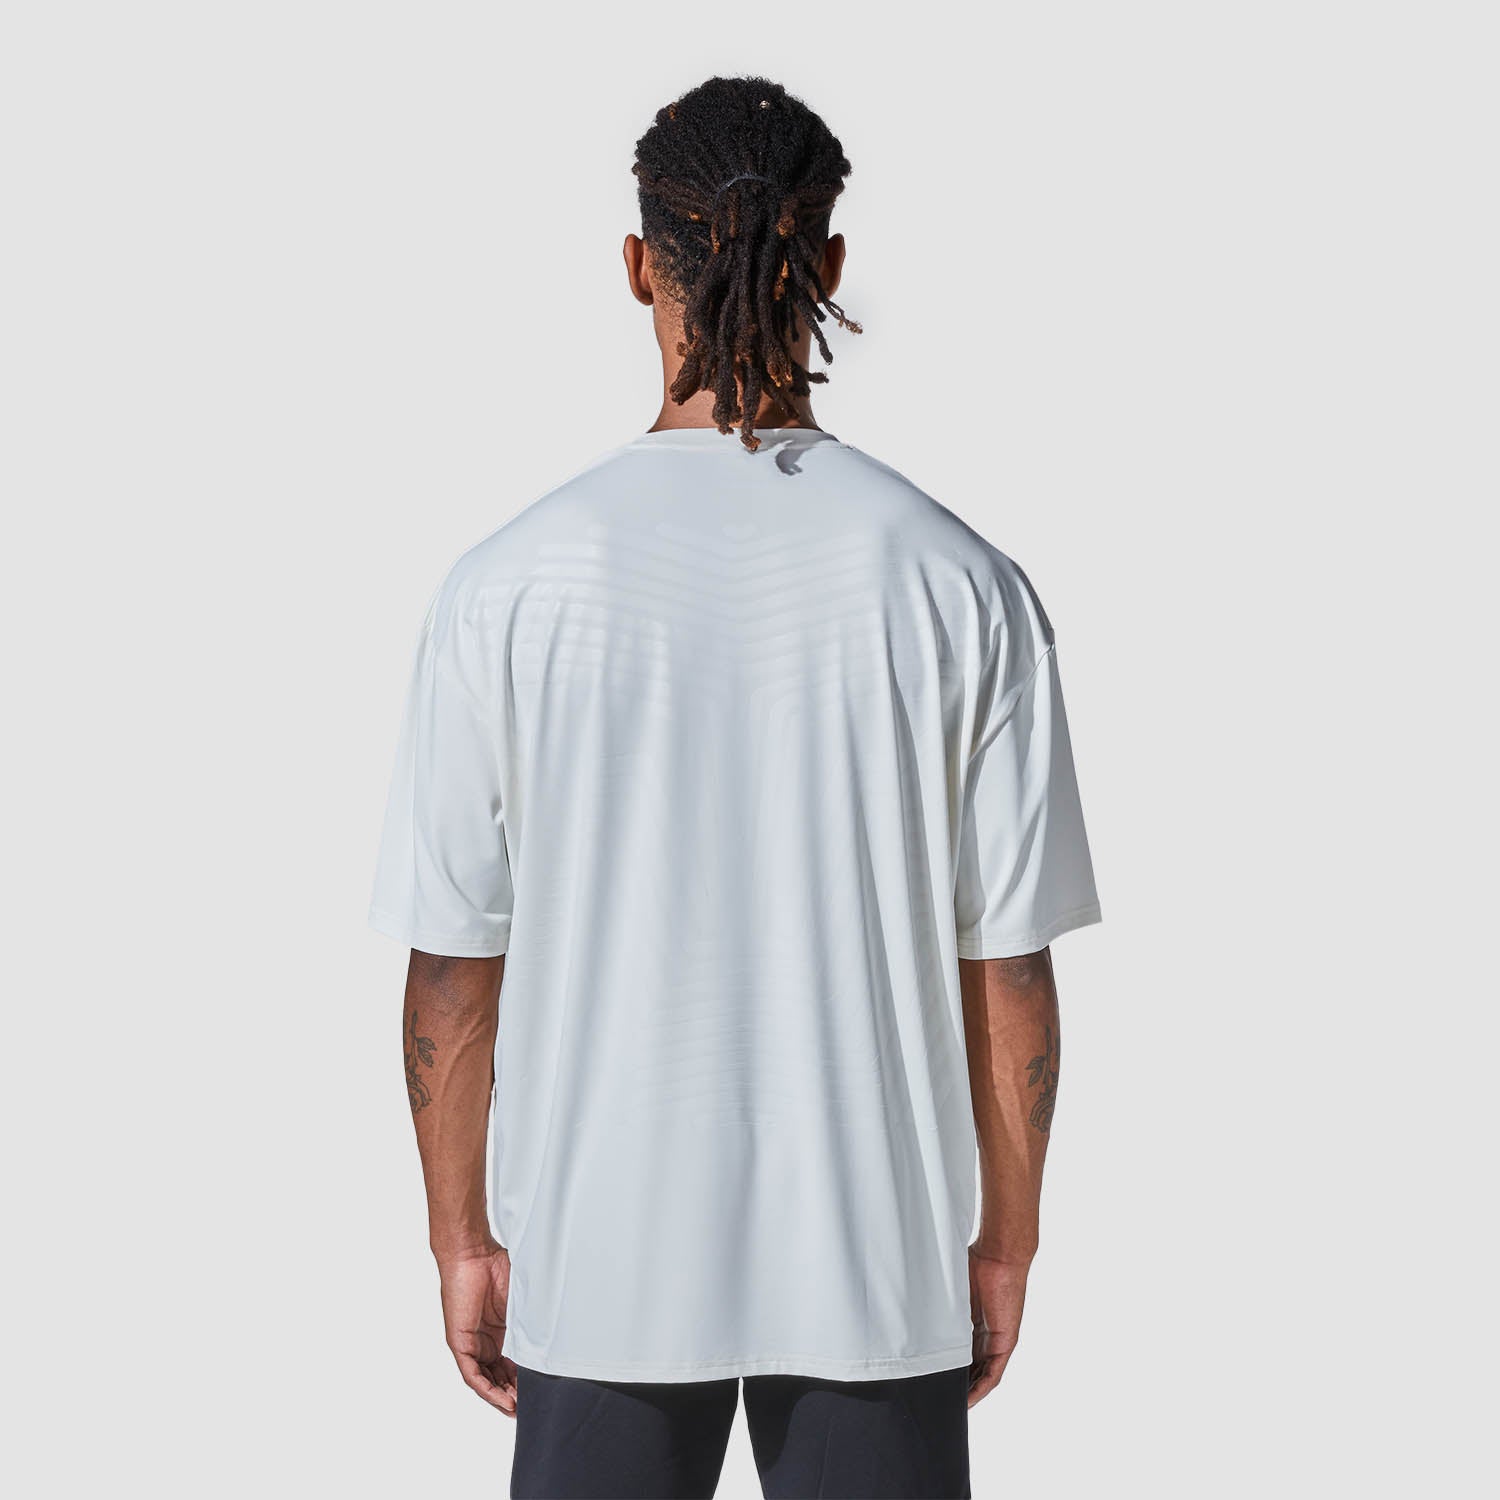 squatwolf-gym-wear-graphic-waves-eye-oversized-tee-white-workout-t-shirts-for-men